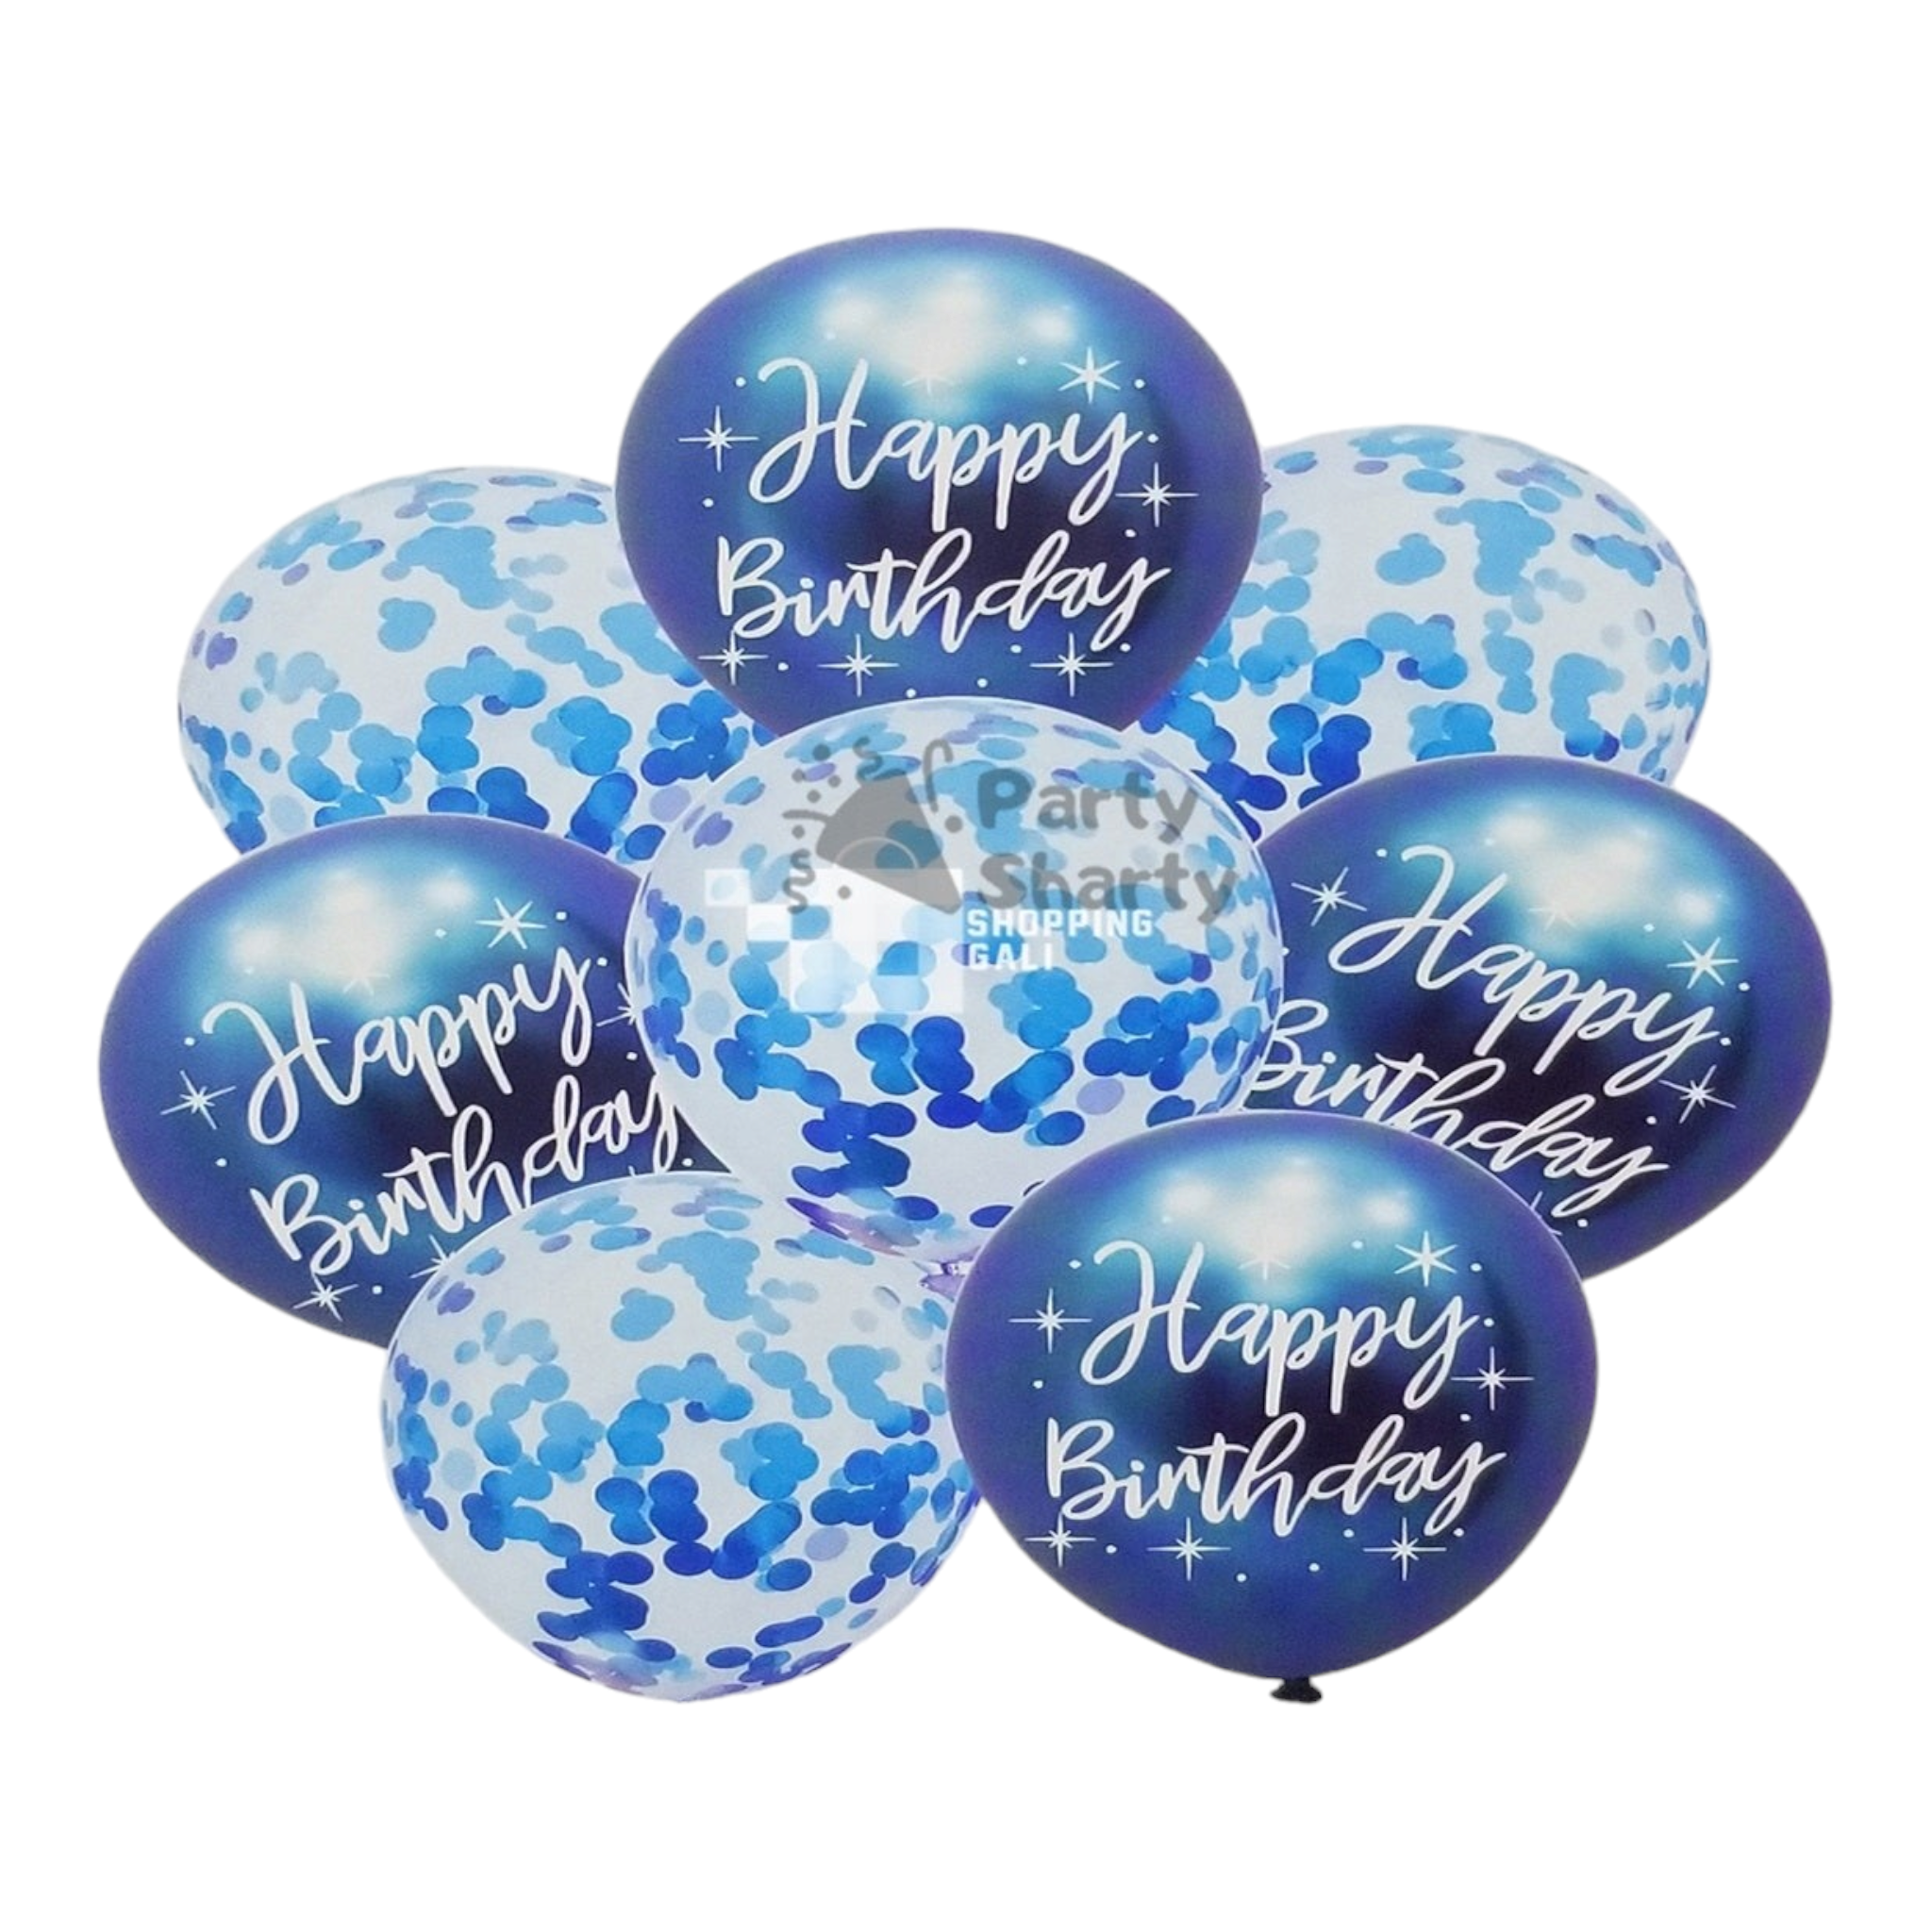 Happy Birthday Latex Balloons 8pack with White Print and Confetti